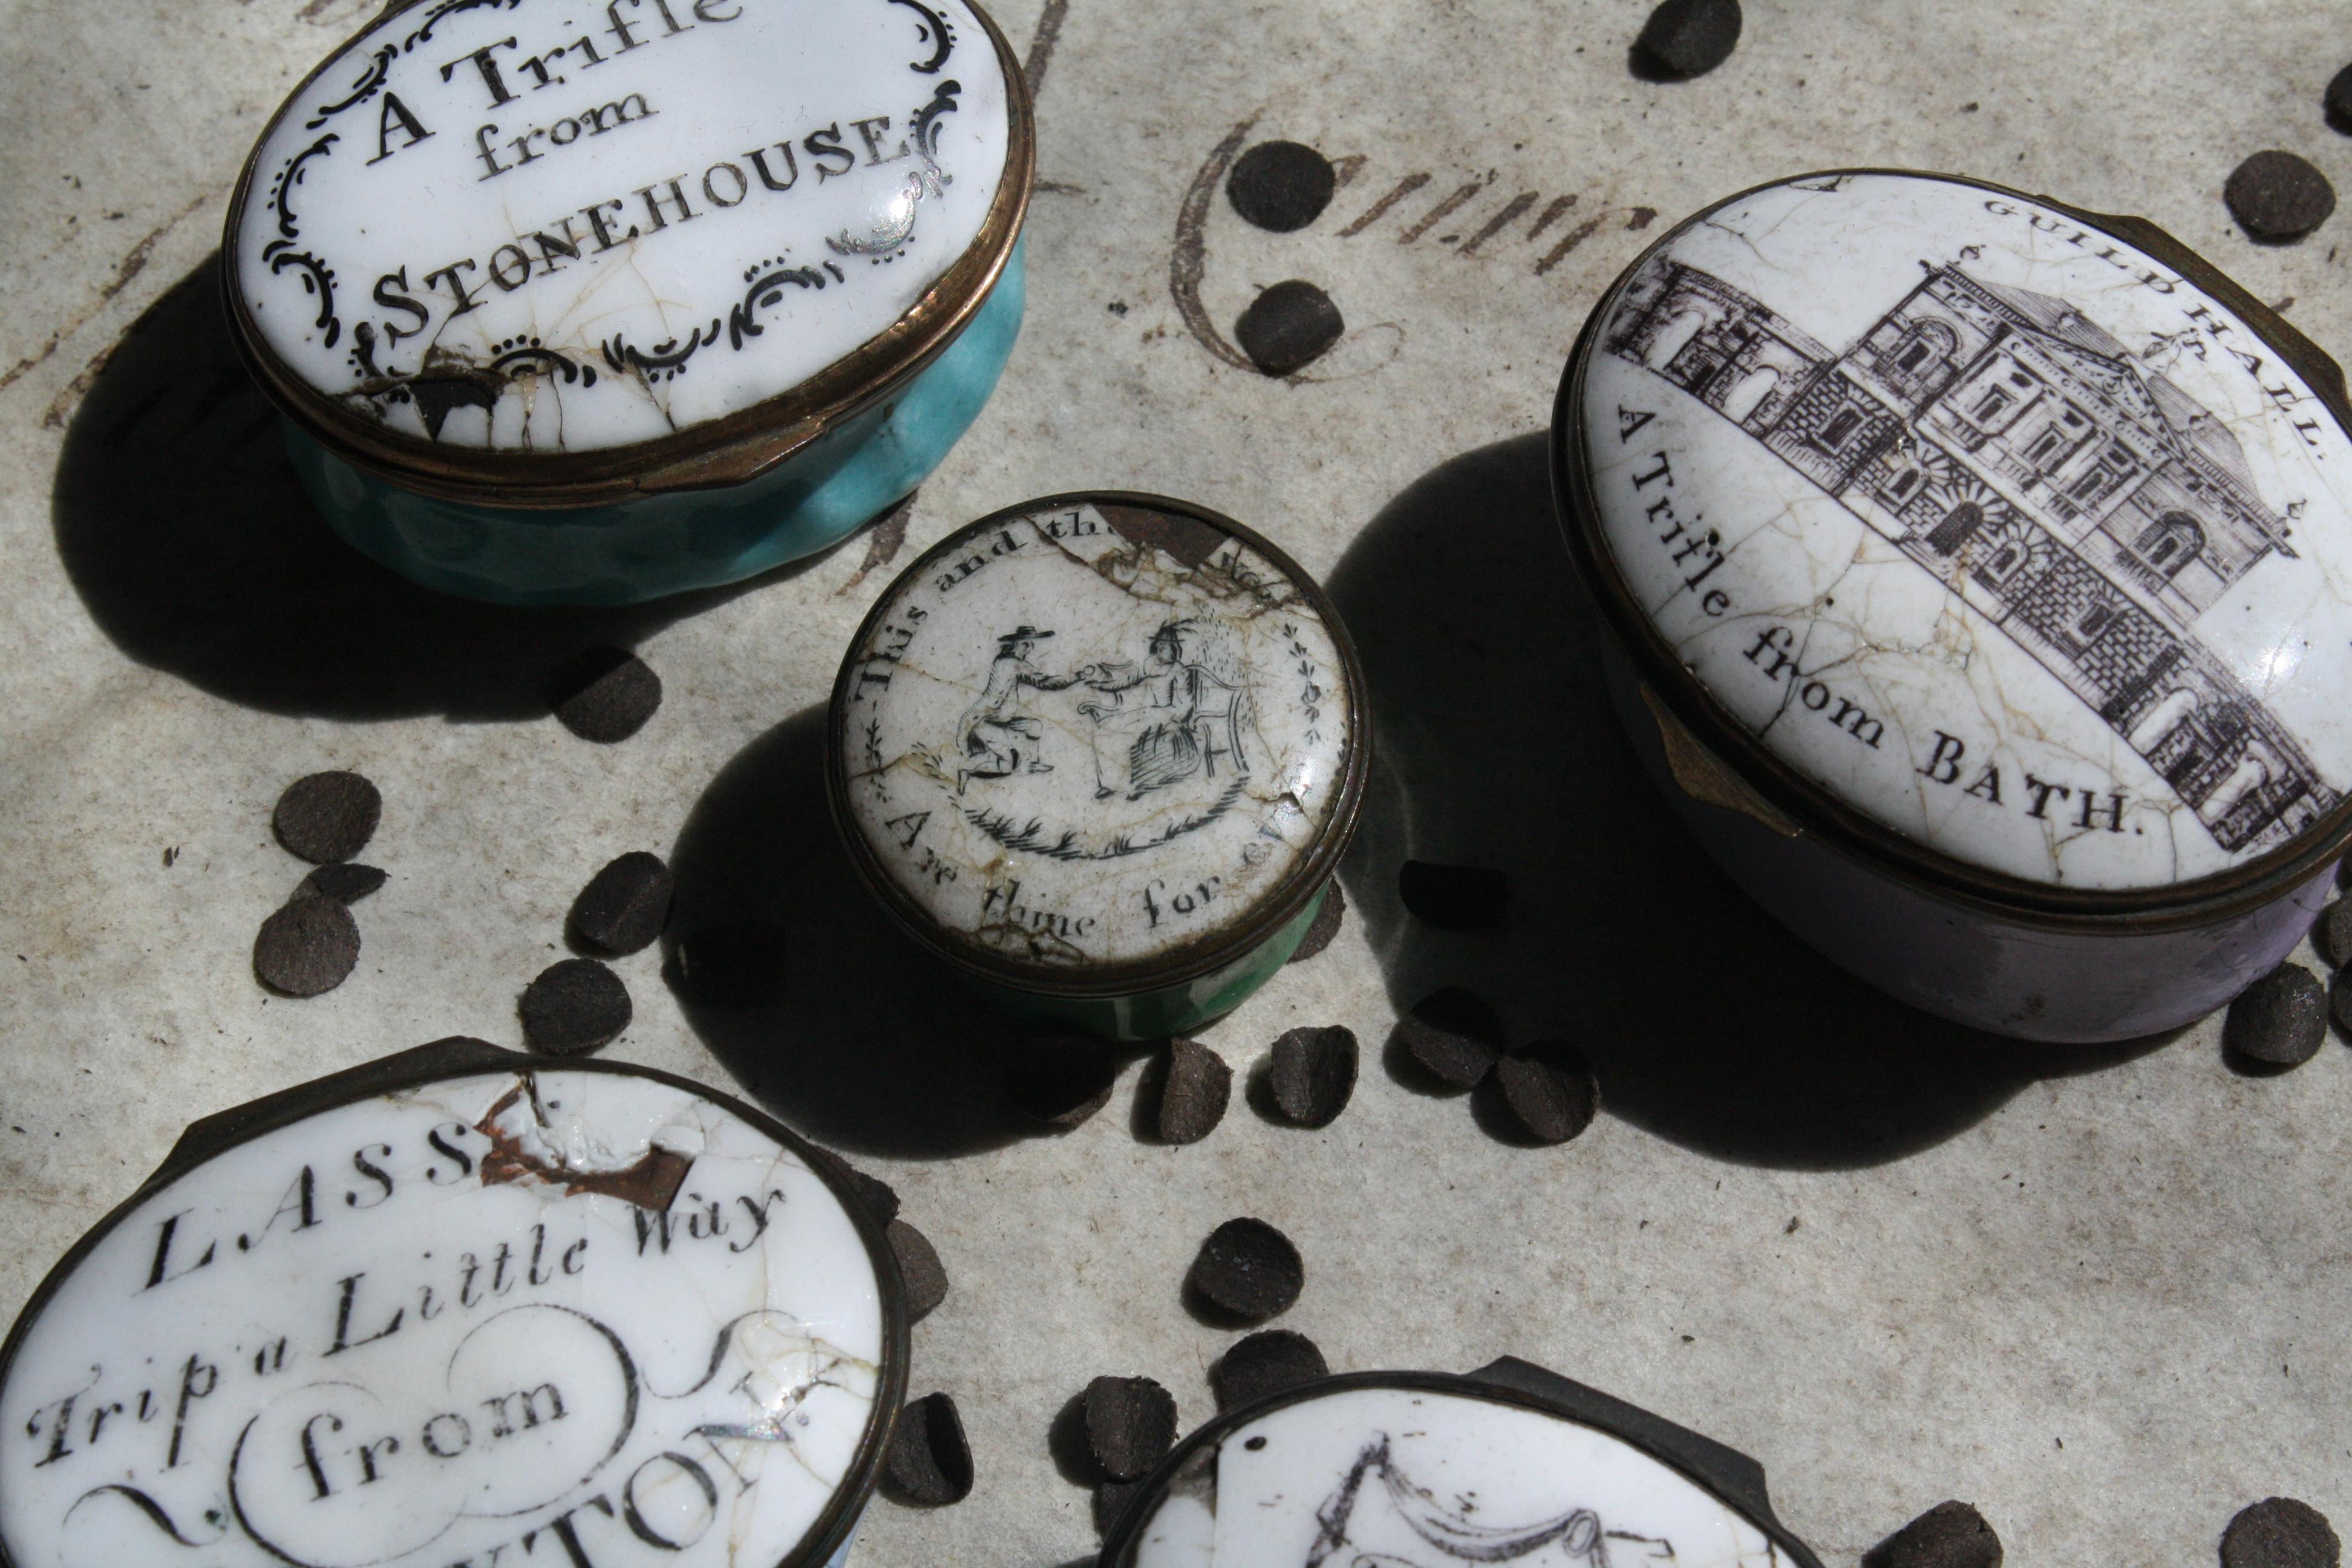 A small and decorative collection of enamel patch boxes from towns and city's of United Kingdom 

These small enamel souvenir where purchased from the highly fashionable city and towns in the late 18th century Bath, Buxton, Swansea and Stonehouse.